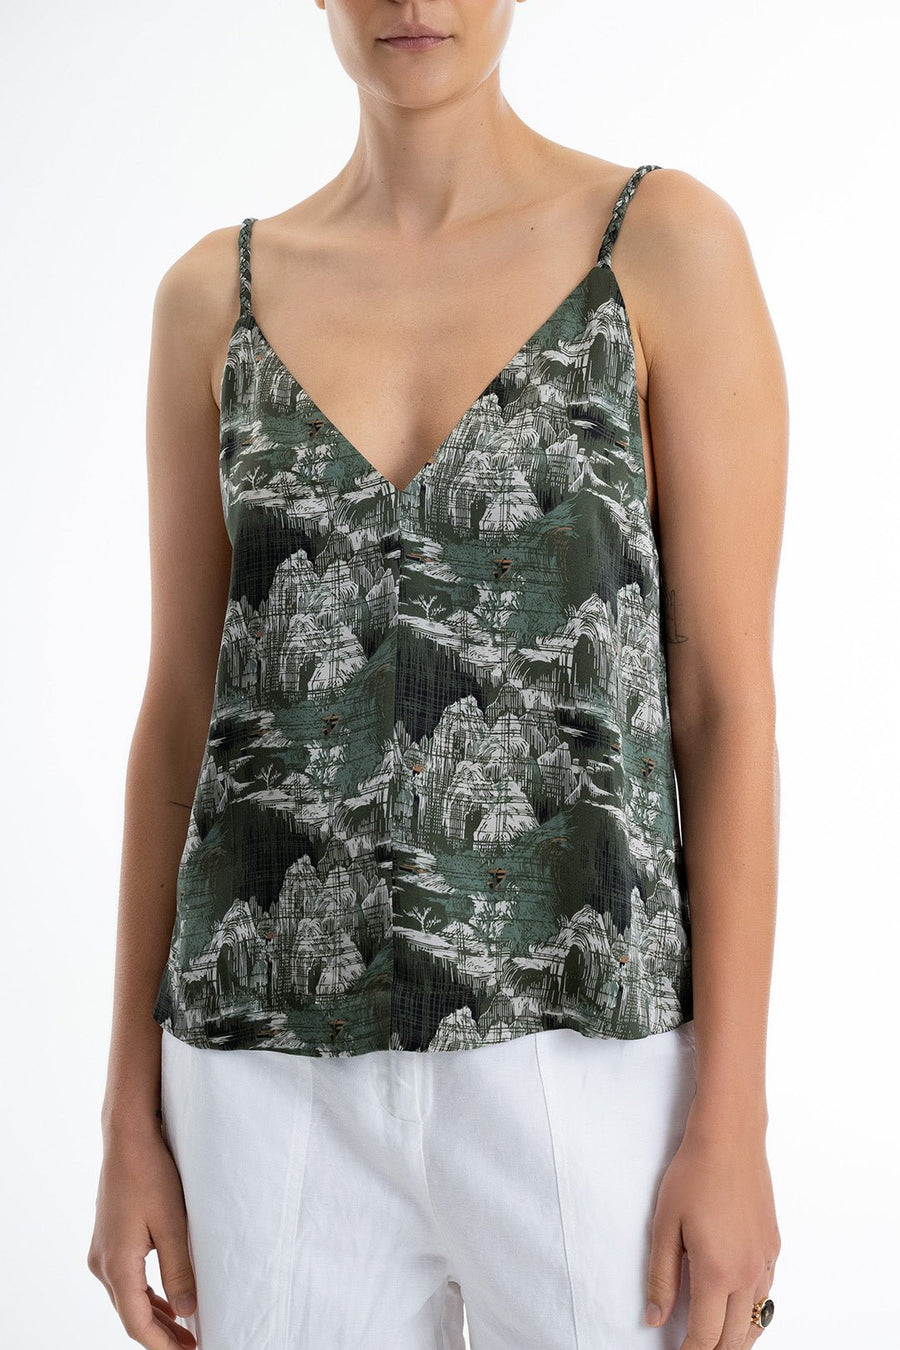 OASIS CAMI , MEADOW - Burning Torch Online Boutique